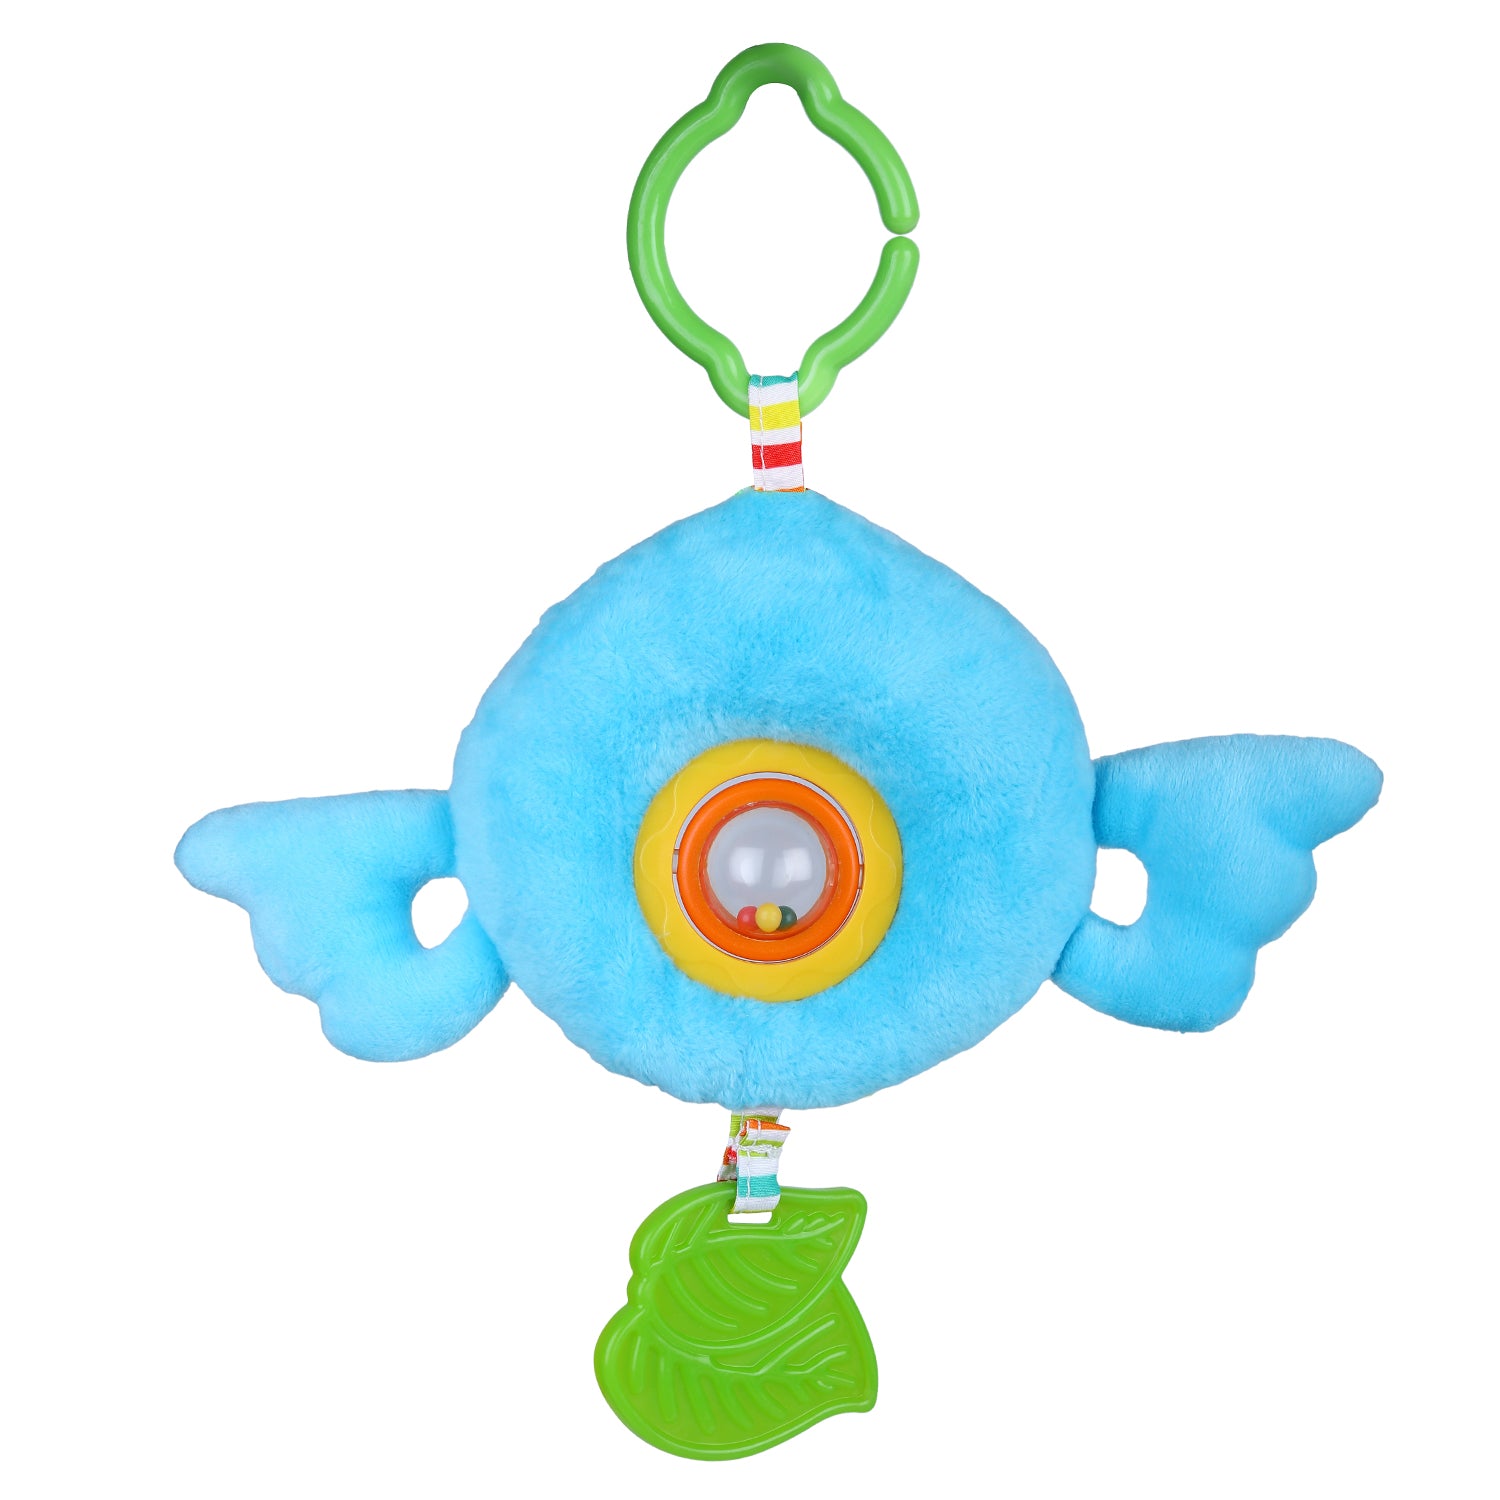 Baby Moo Bird Stroller Crib Hanging Plush Rattle Toy With Teether - Blue